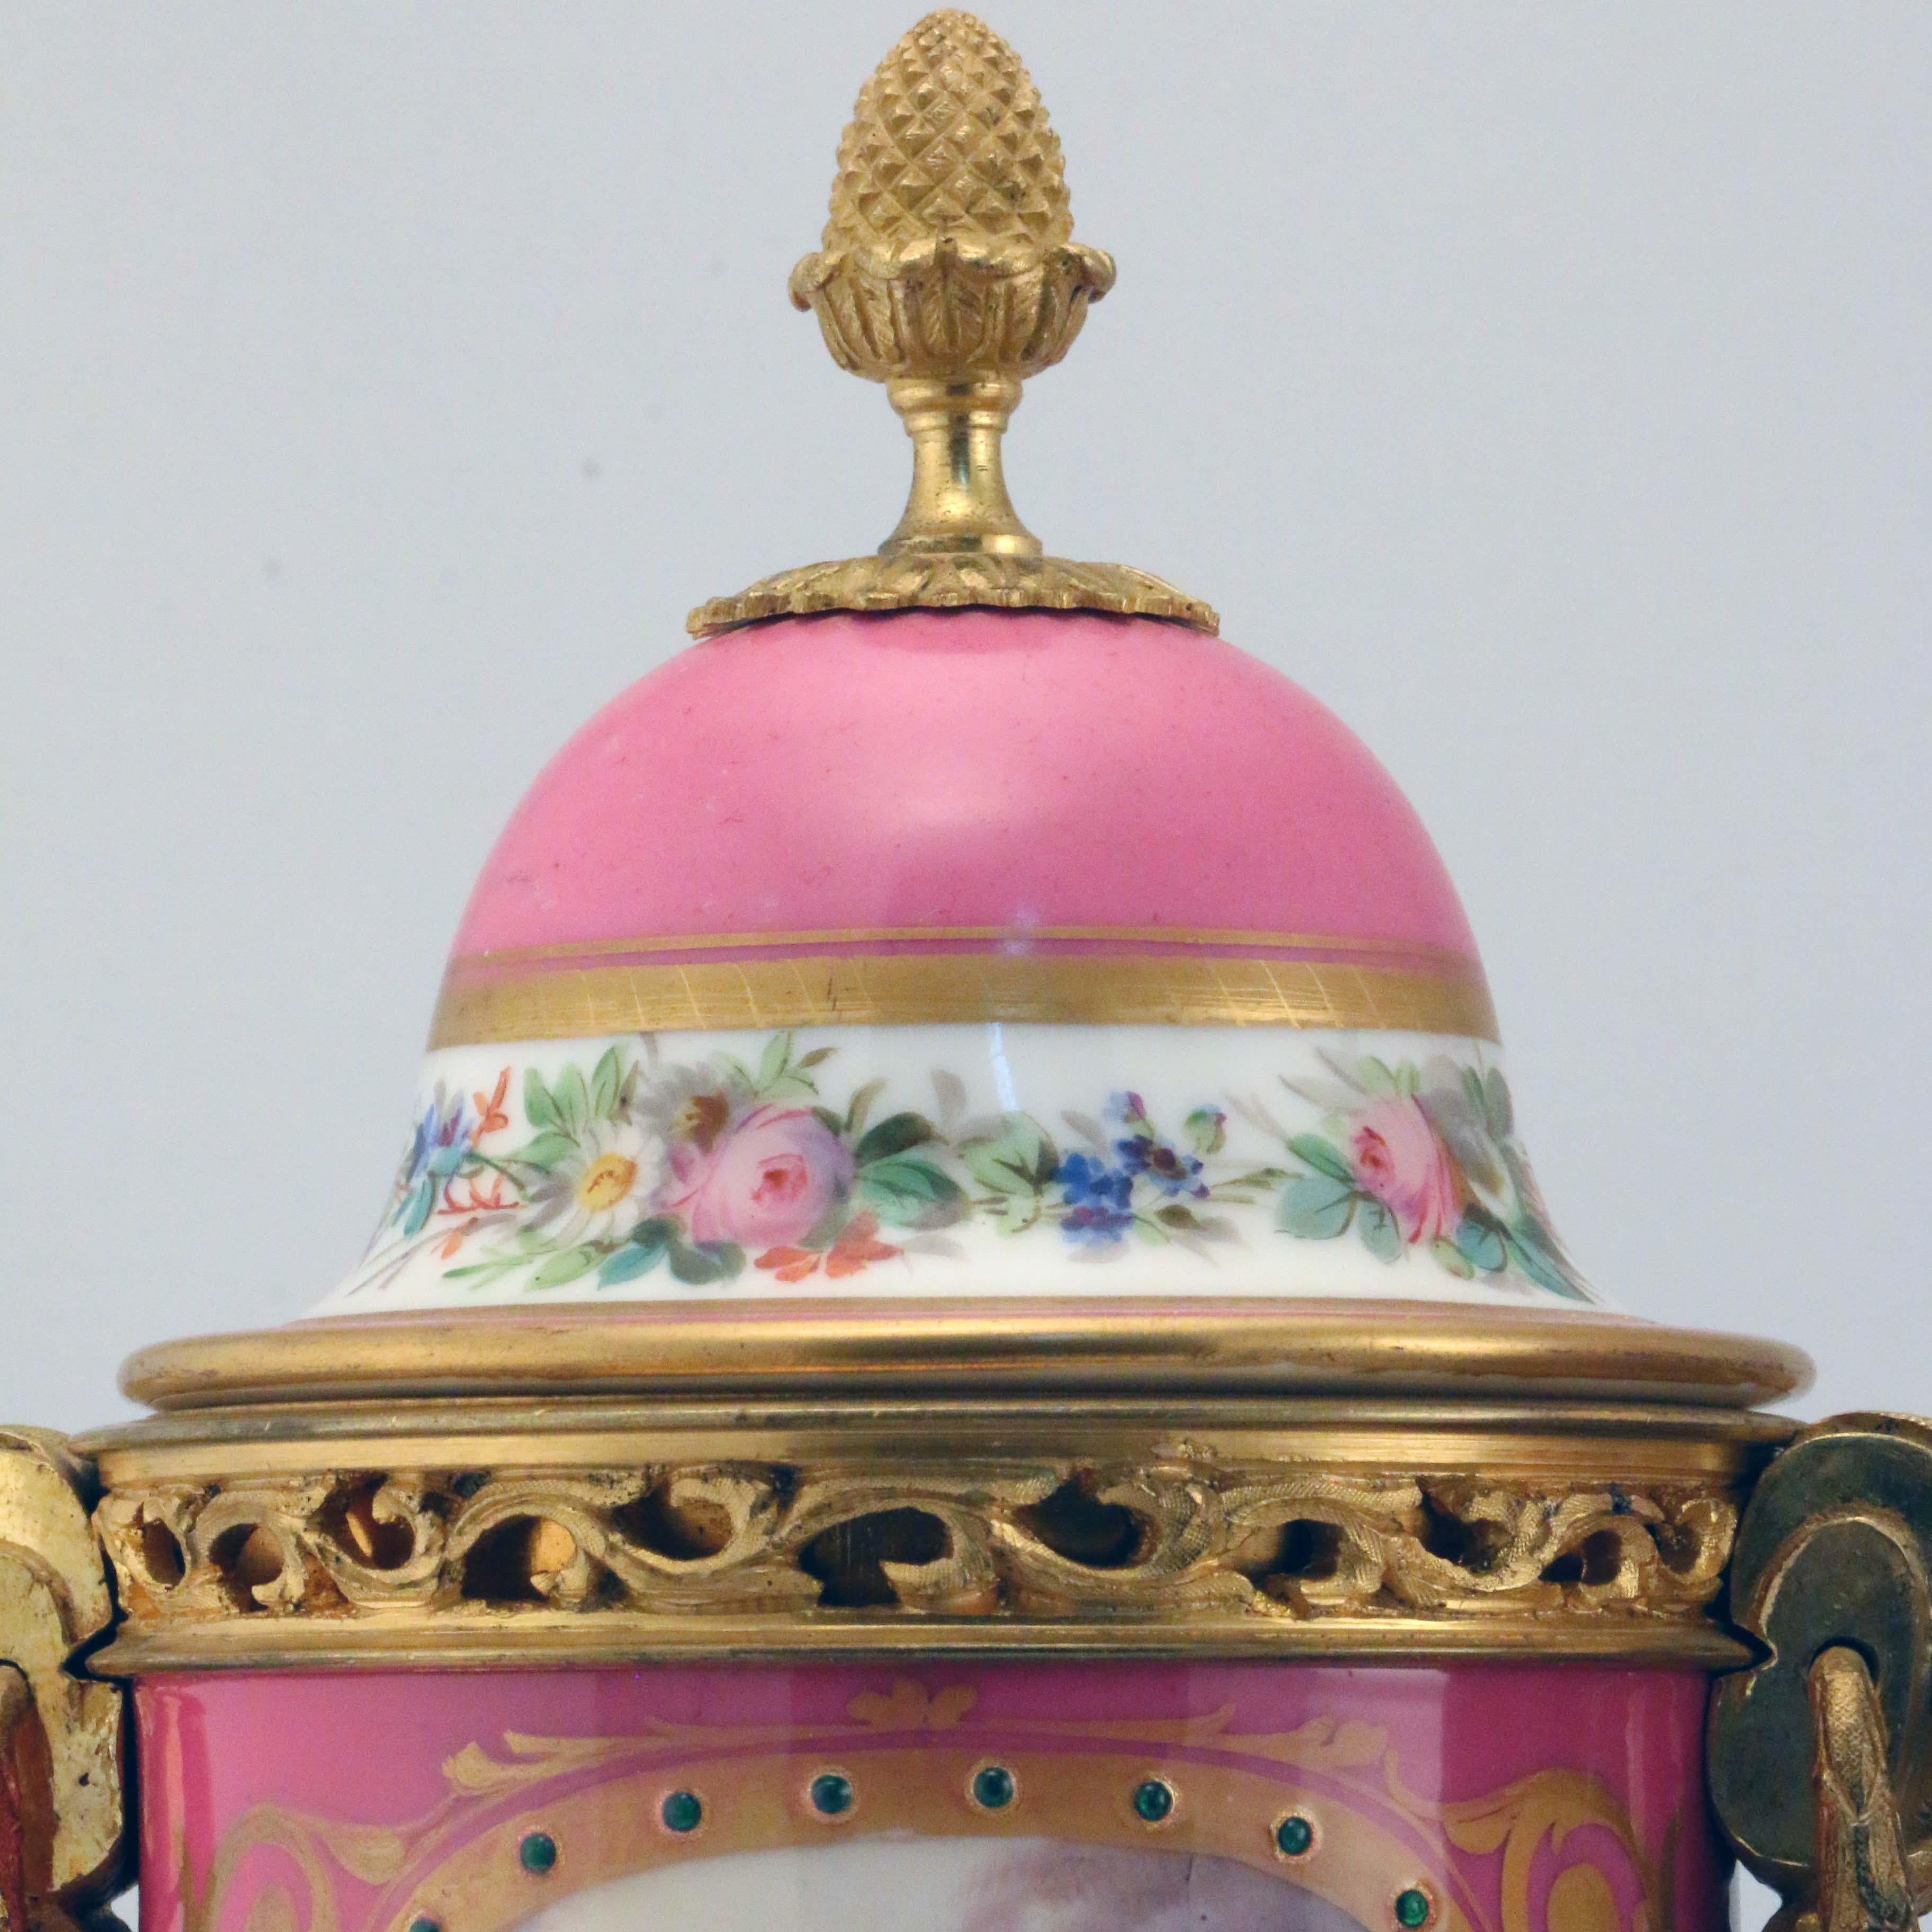 Pair of Louis XV Style Gilt Bronze Mounted Paris Pink Porcelain Covered Urns For Sale 3